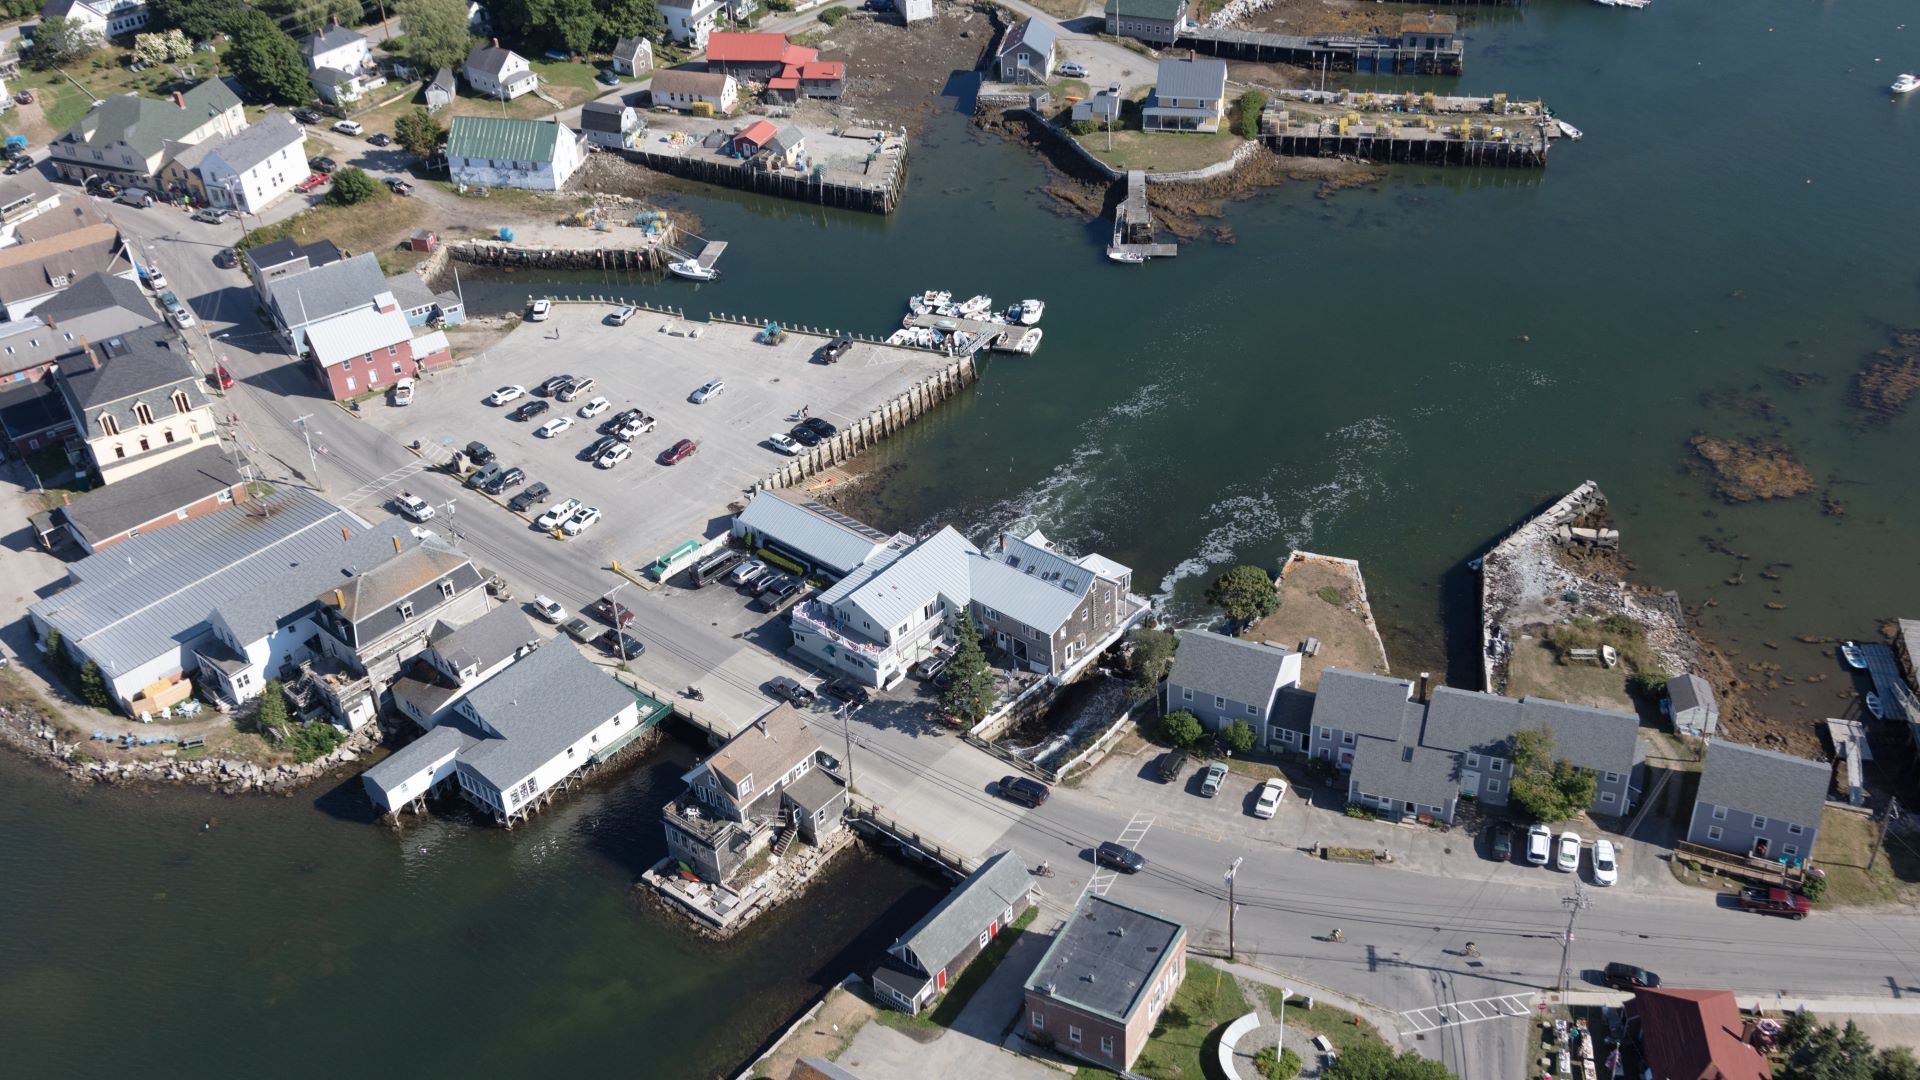 Aerial view of a parking lot and buildings on the edge of water in Vinalhaven